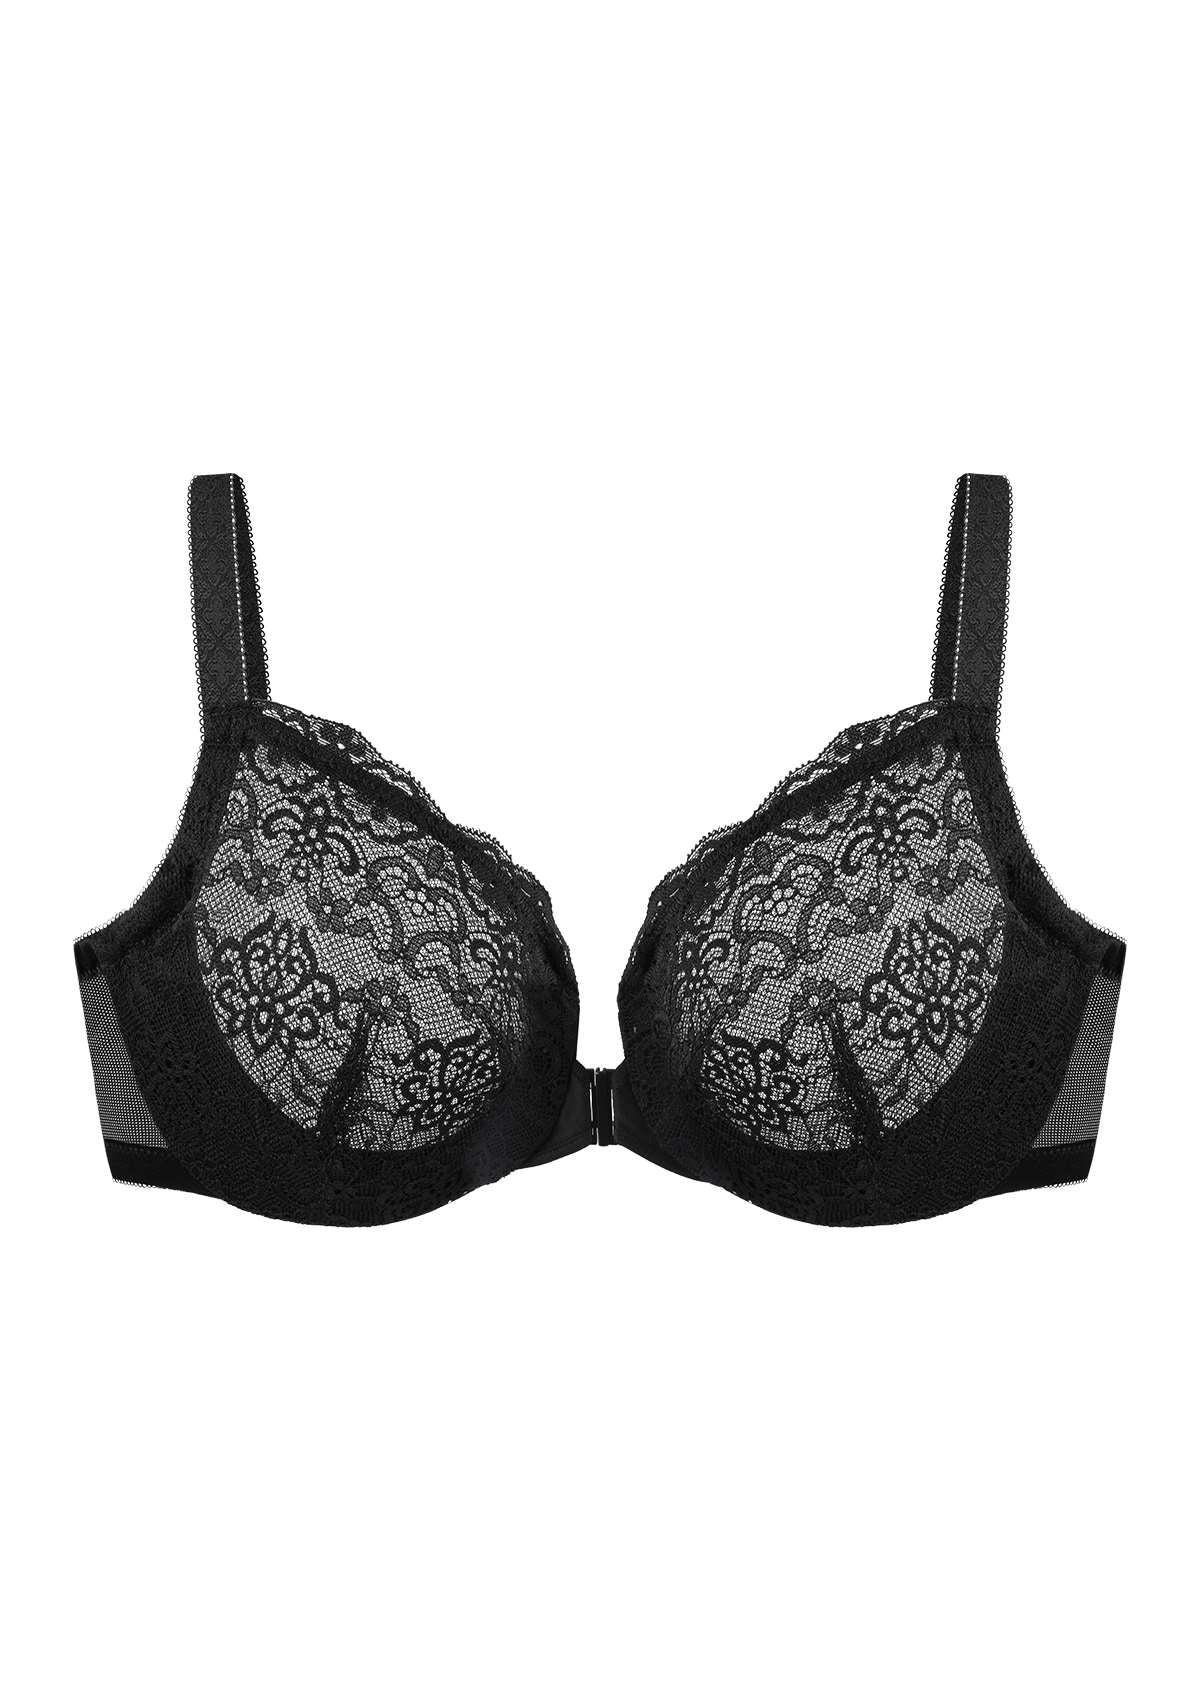 HSIA Nymphaea Front-Close Unlined Retro Floral Lace Back Smoothing Bra - Black / 36 / C